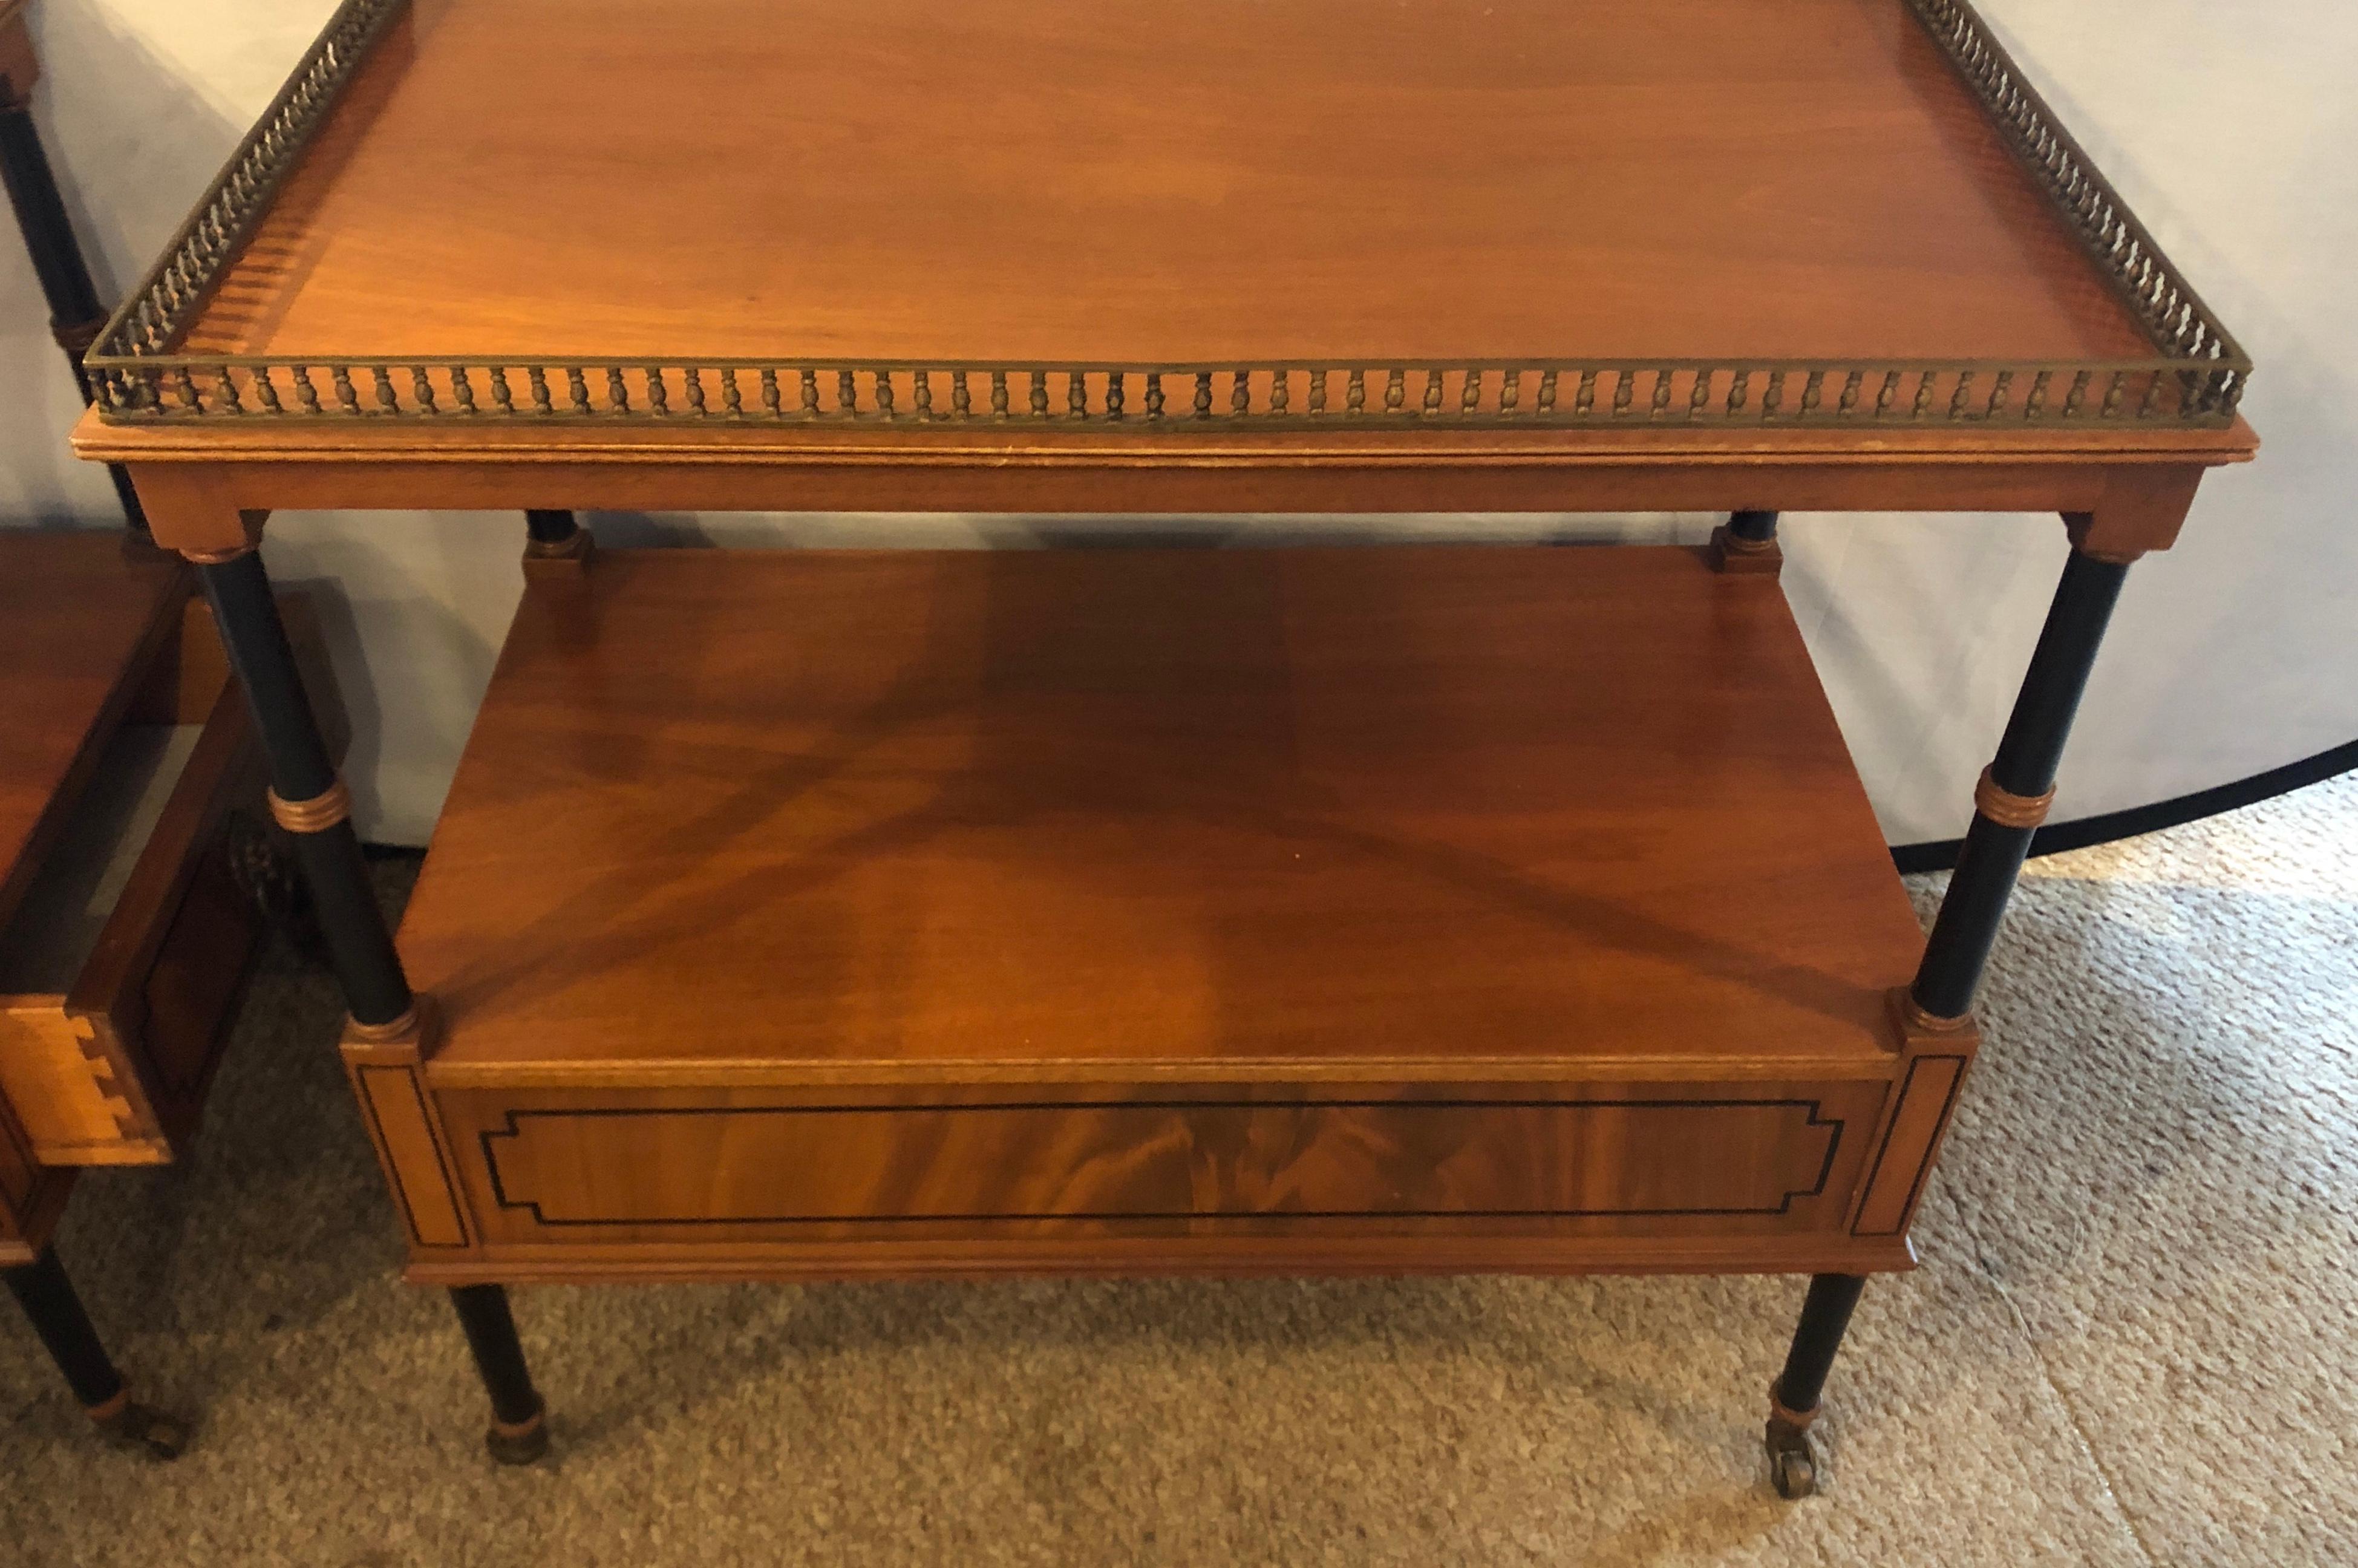 Georgian Pair of Beacon Hill Mahogany and Ebony Galleried Stands with Side Drawers